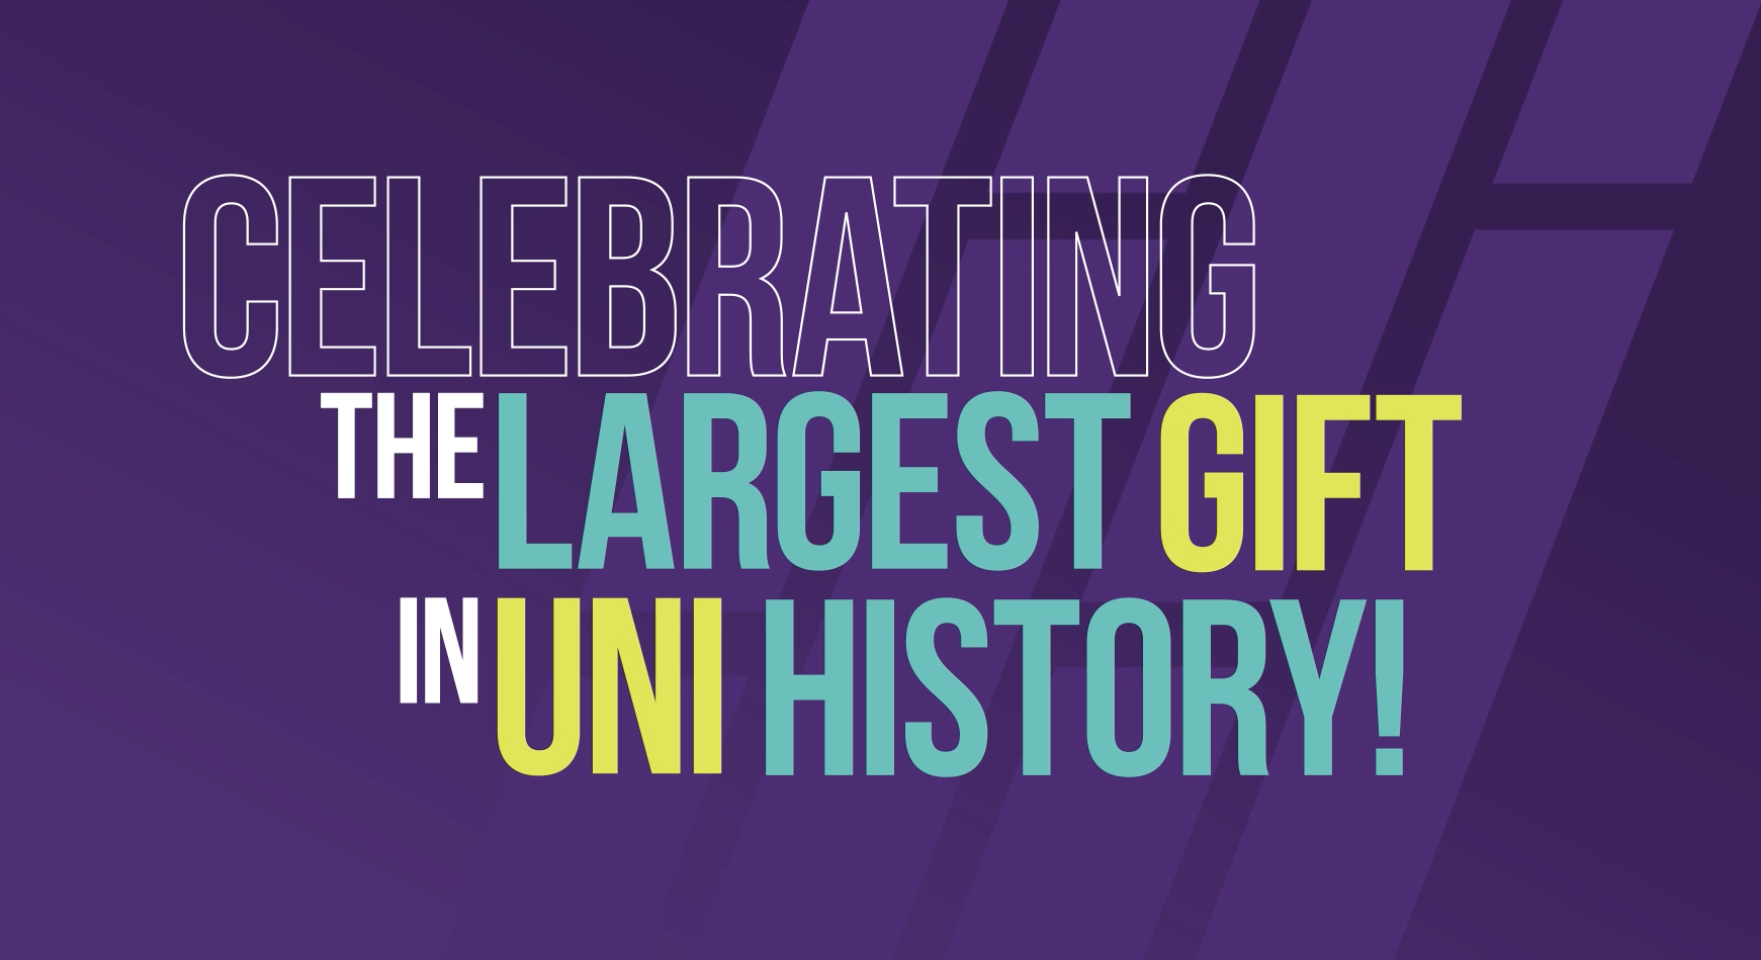 Celebrating the Largest Gift in UNI History!